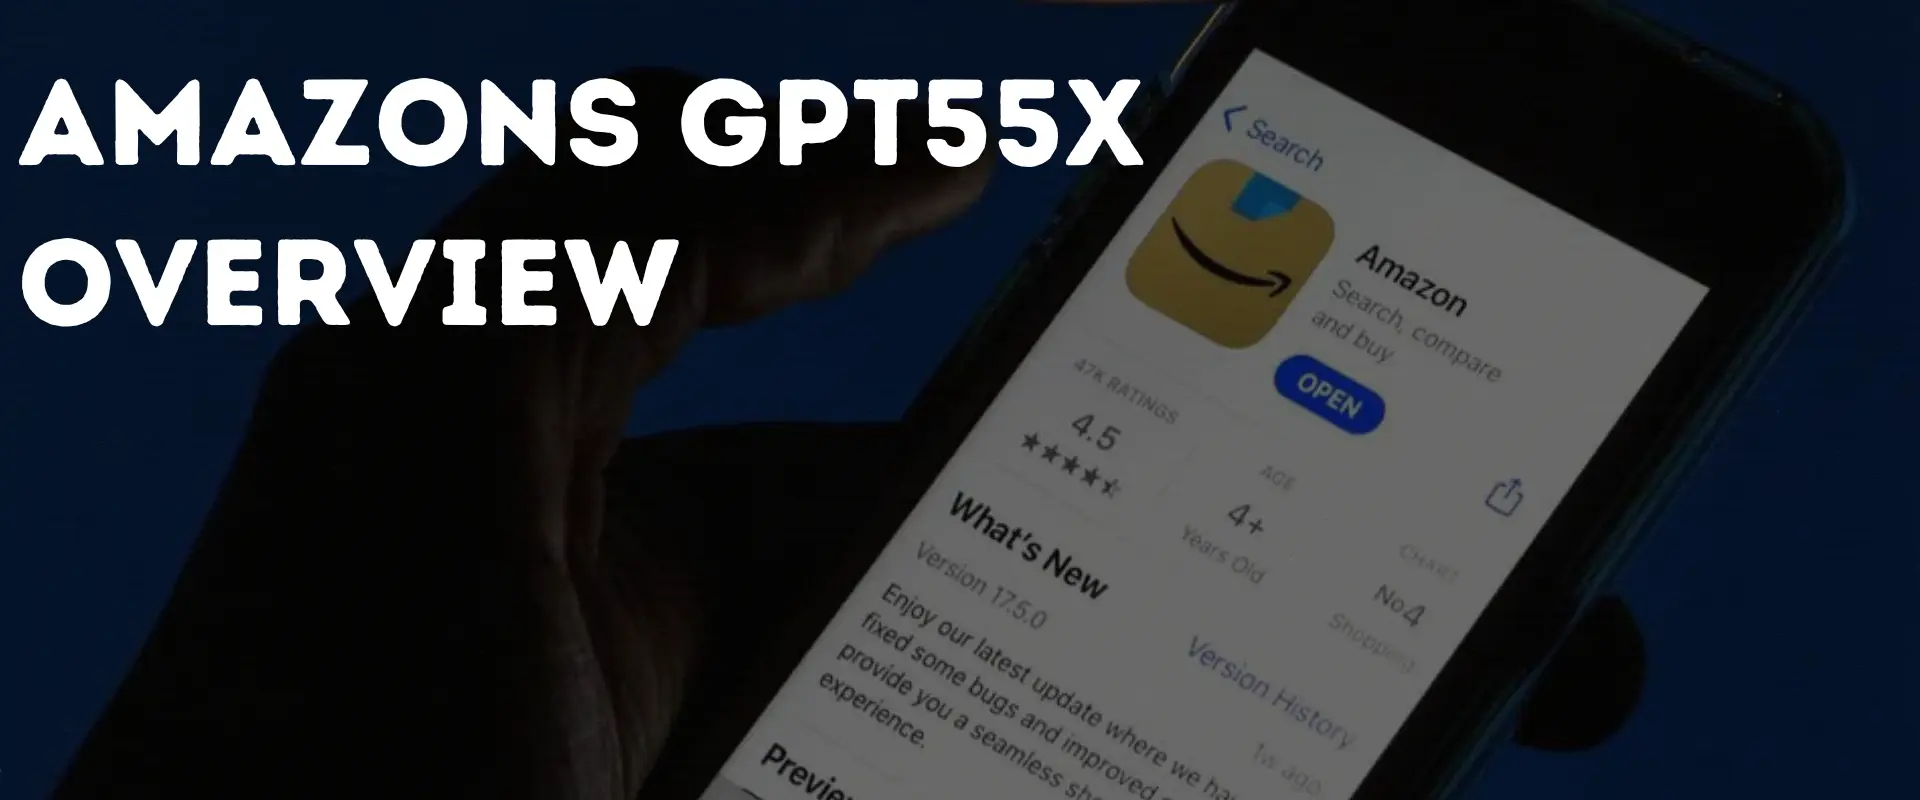 What Does Amazons GPT55X Mean and How Does It Perform?